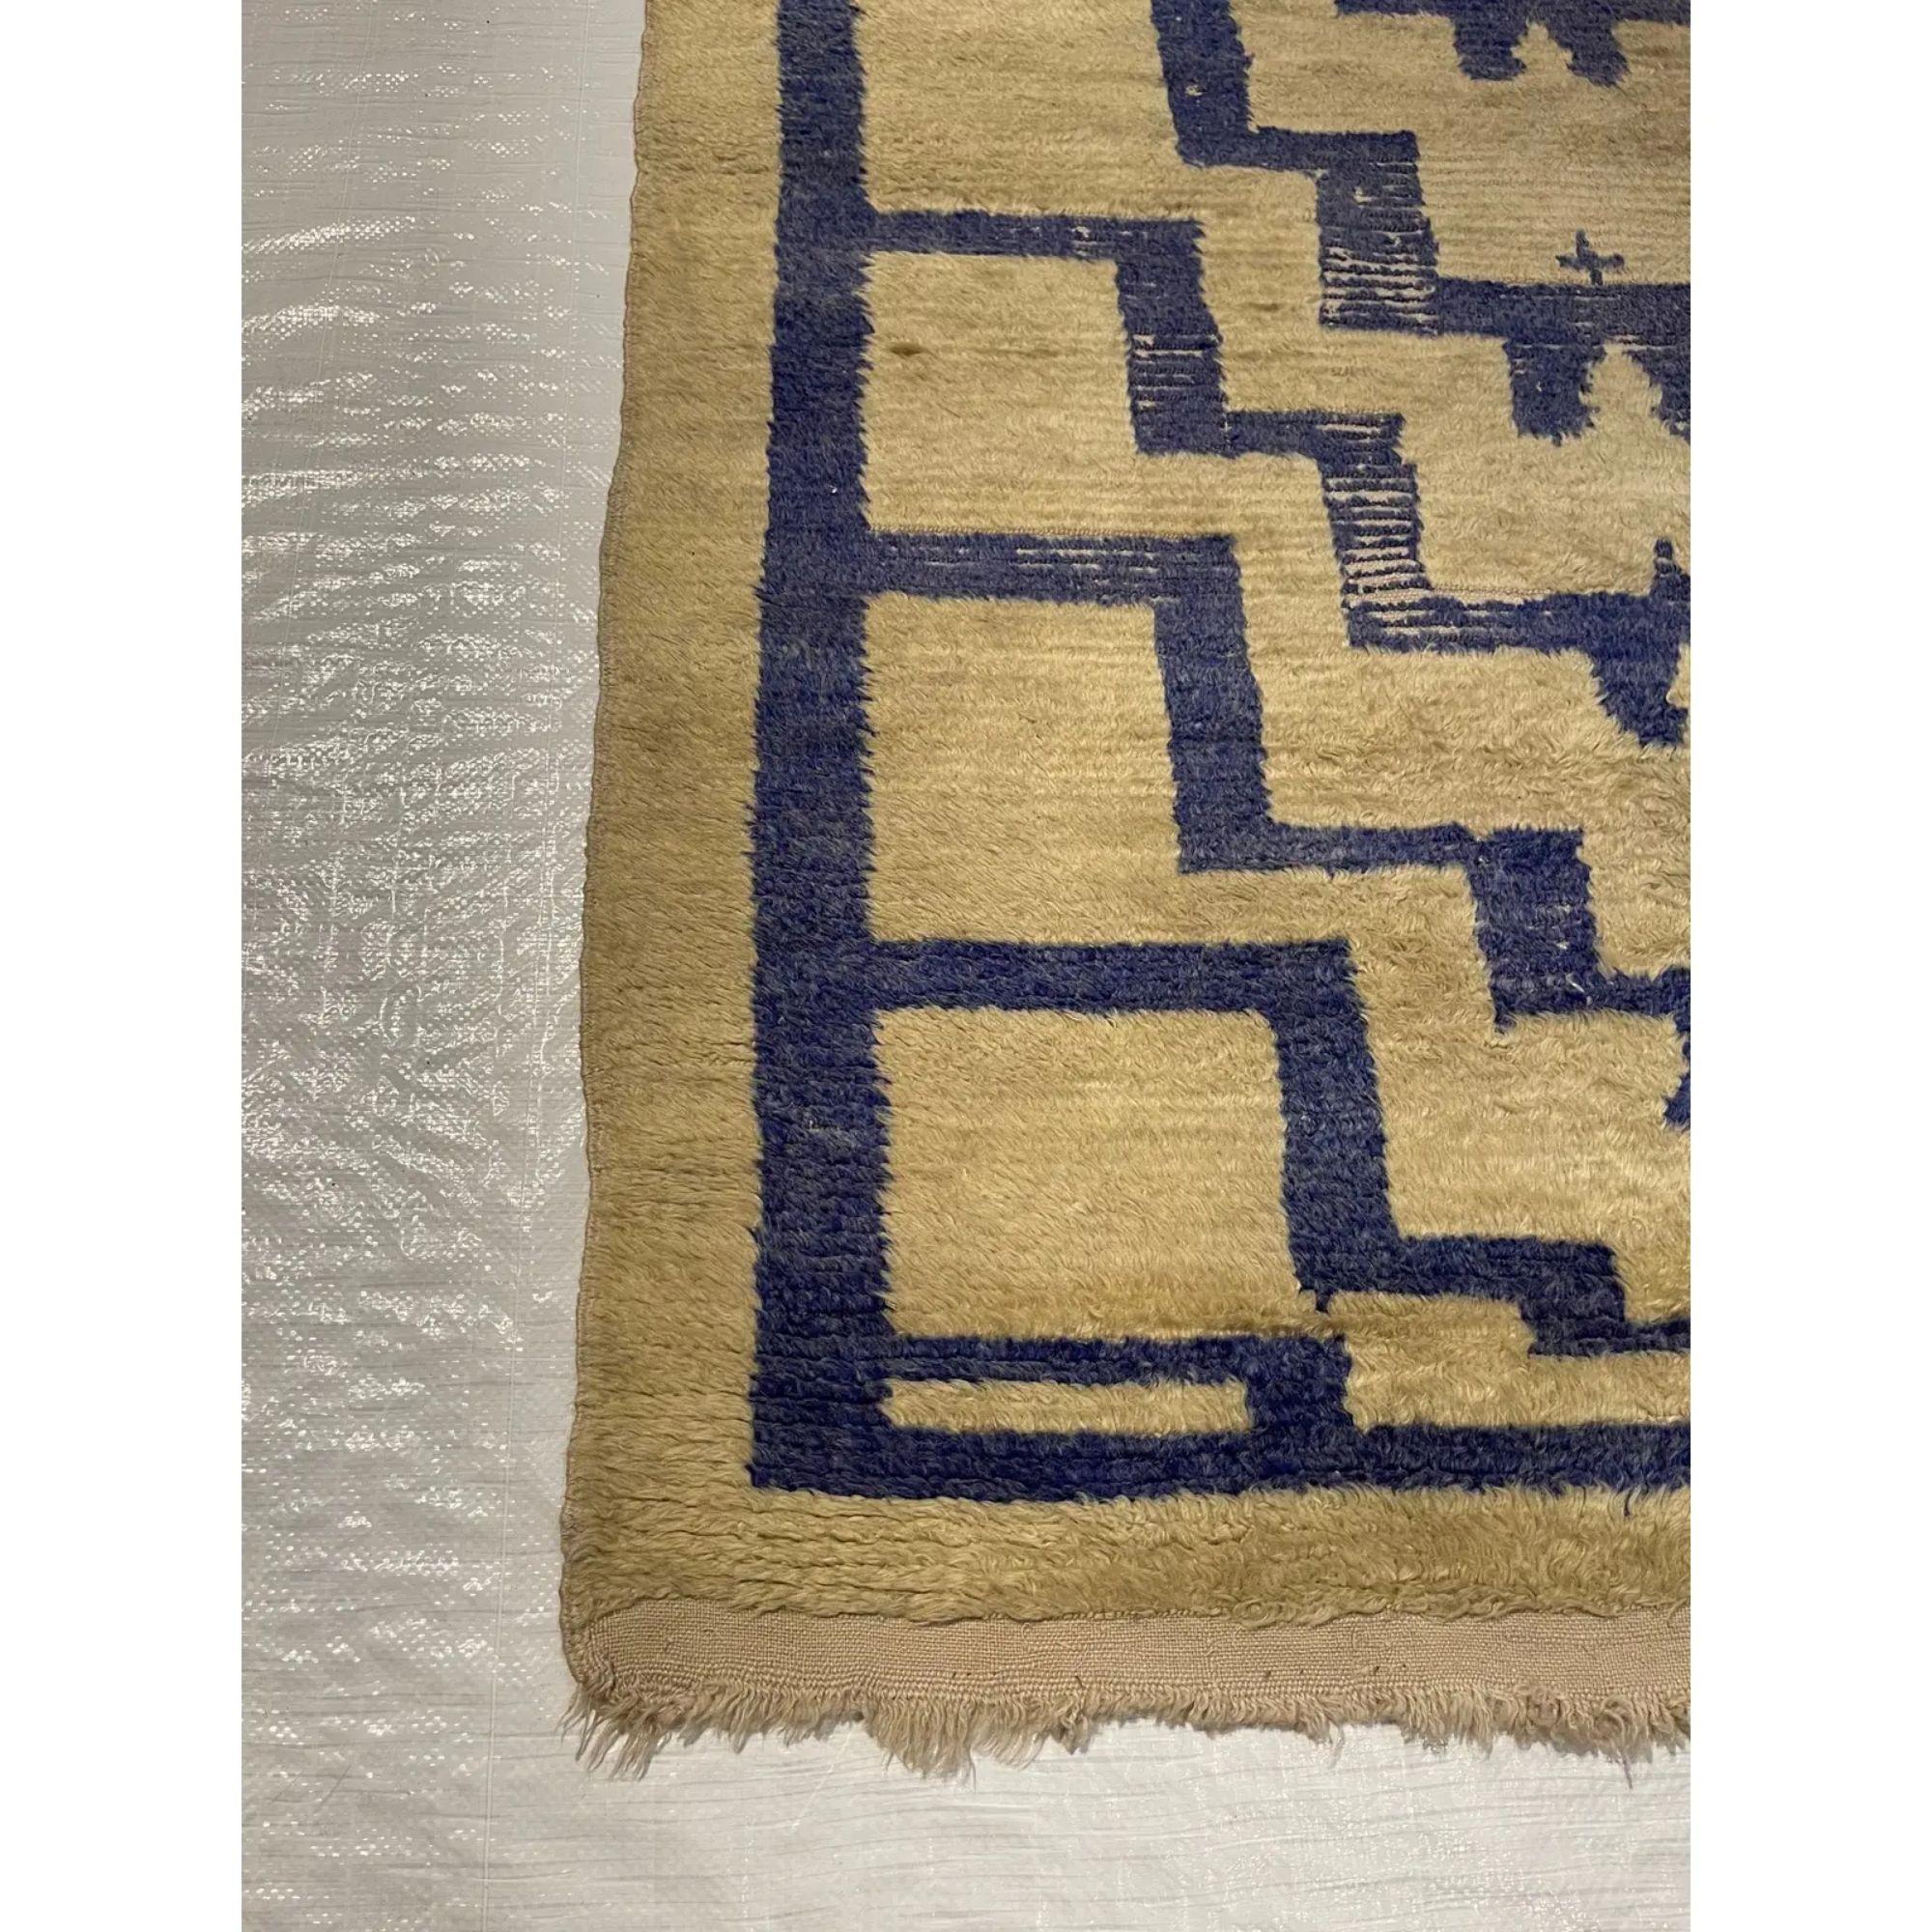 The Moroccan rugs are most famous for their dynamic color designs and bold geometric patterns. Today, the Moroccan rug is one the industry’s hottest design trend. Each piece is a sliver of history, a slice of true folk art, and is an heirloom that